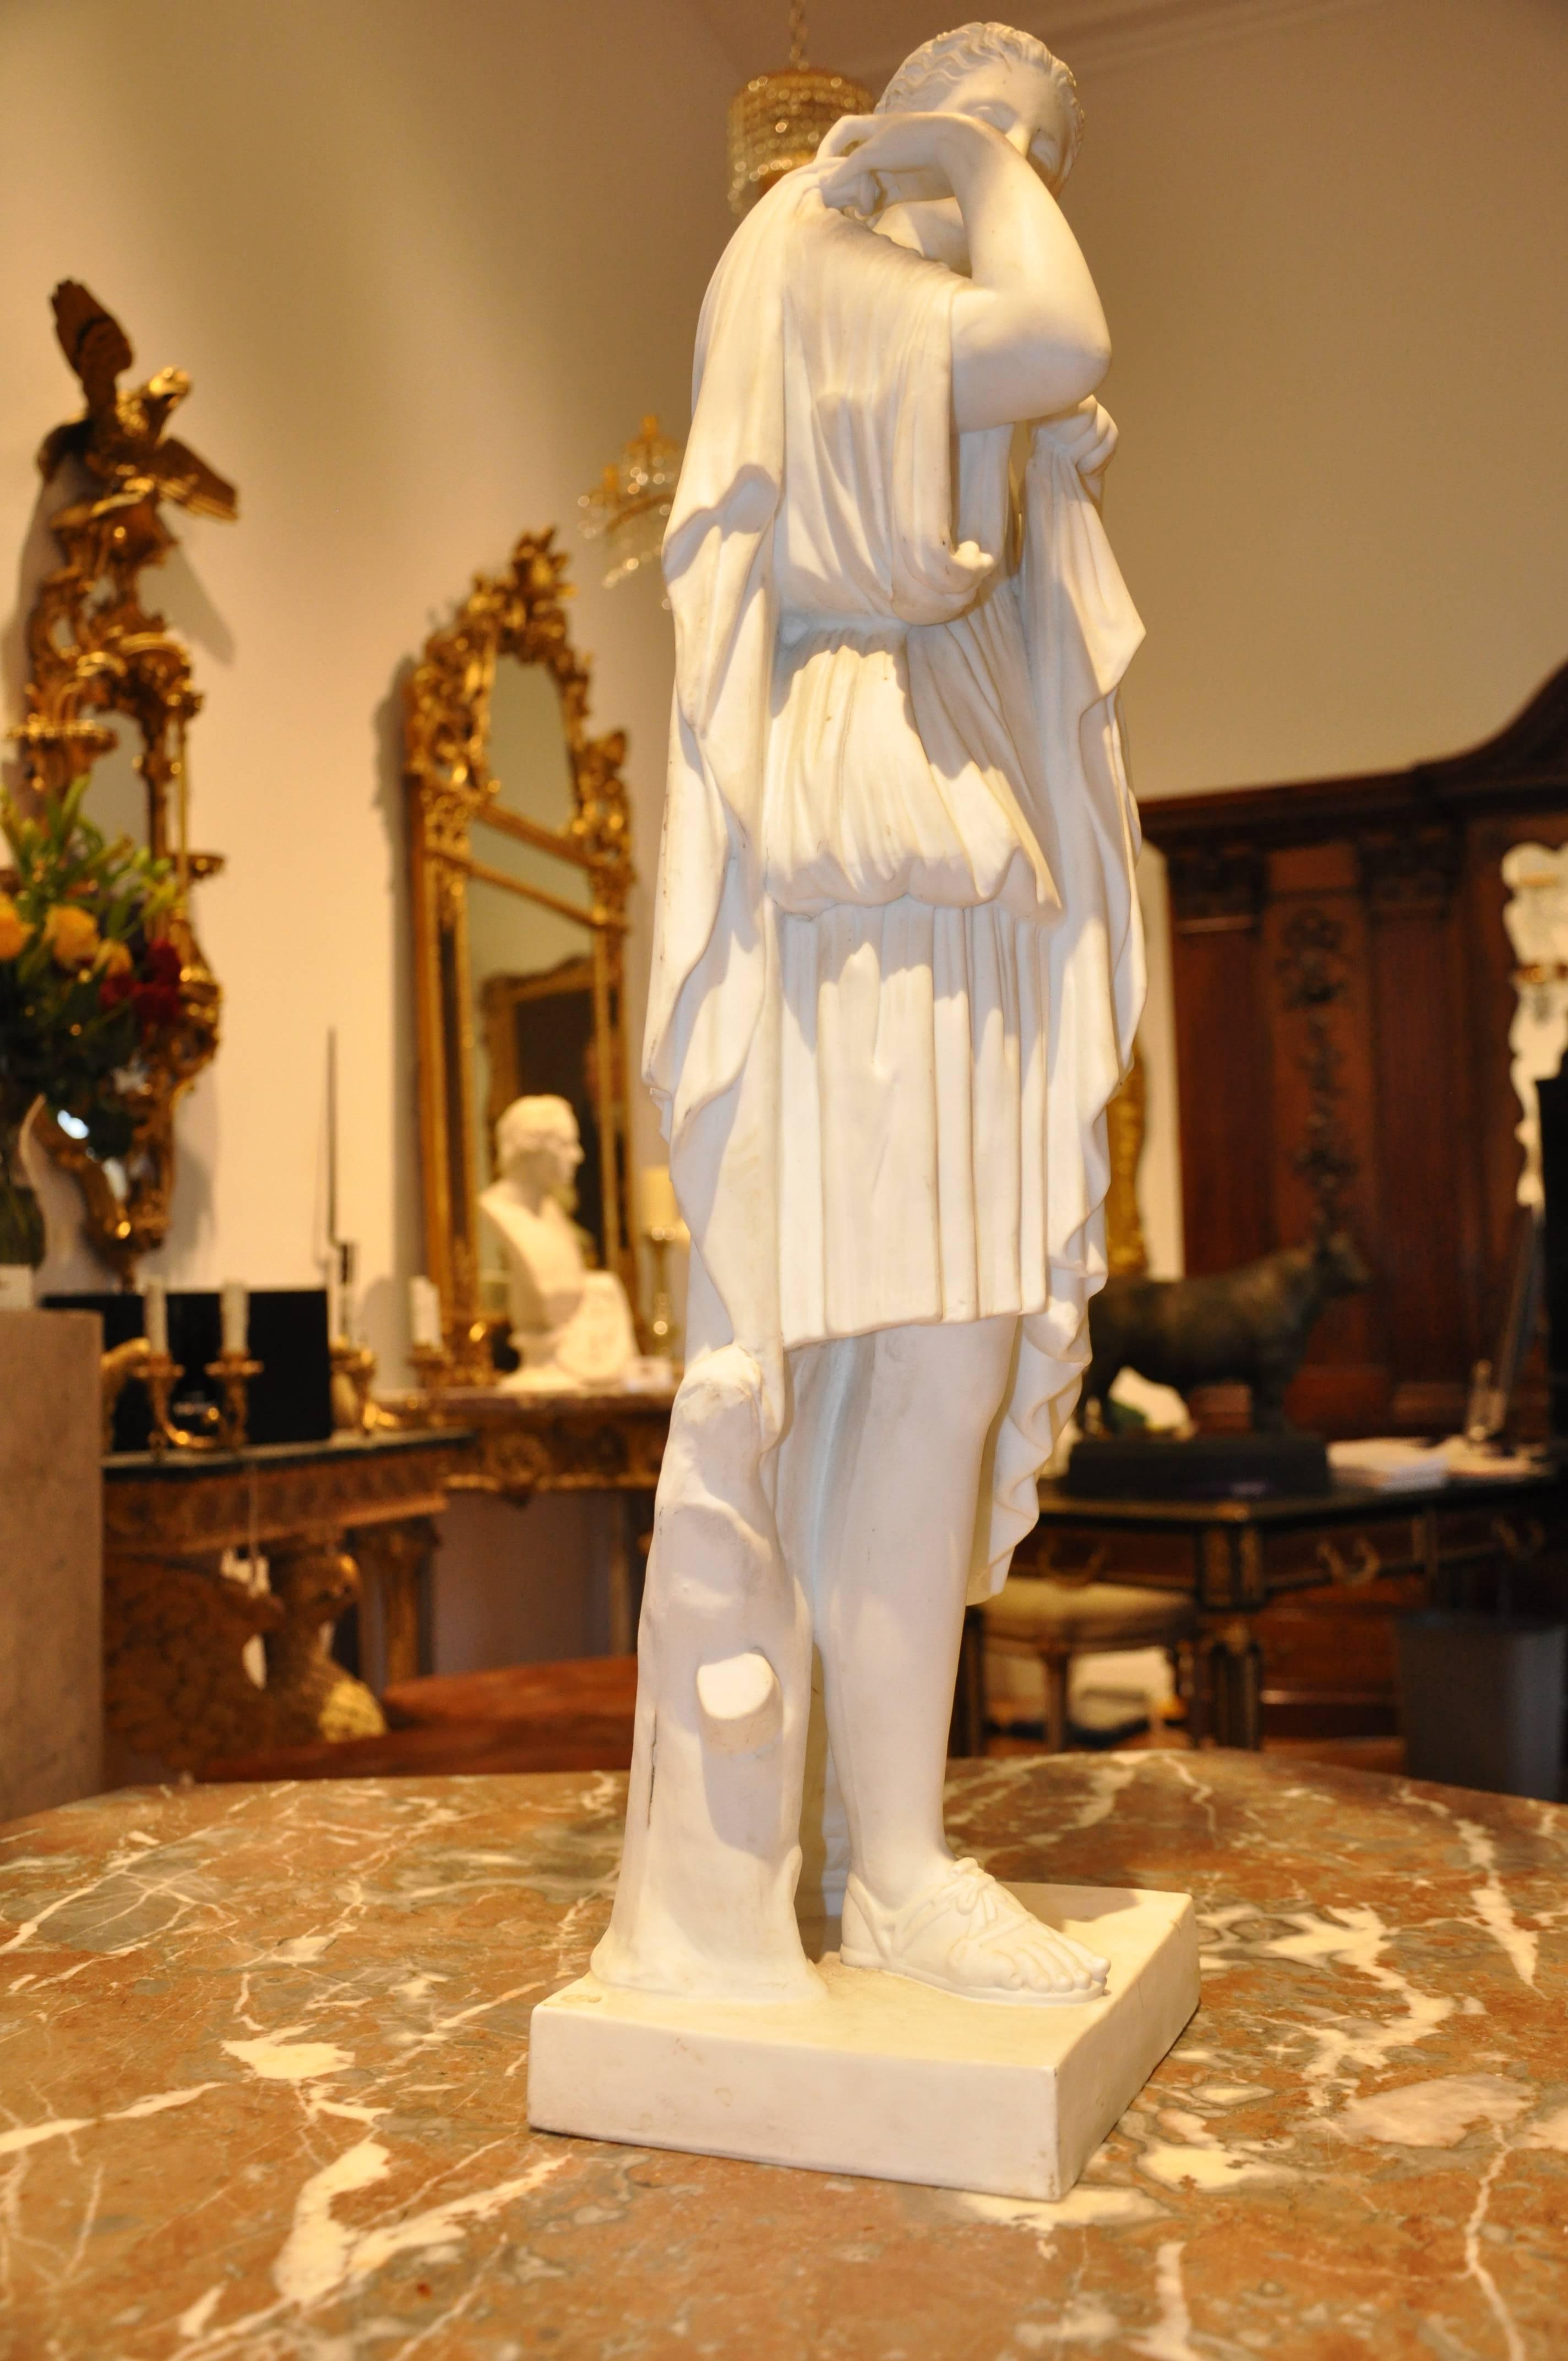 19th century Bisquit porcelain statue of Diana 

- Signed Limoges R L for Raymond Laporte who worked in partnership with Limoges until 1882
- Wonderful large scale

Diana de Gabii: The statue was discovered in 1792 by Gavin Hamilton on the